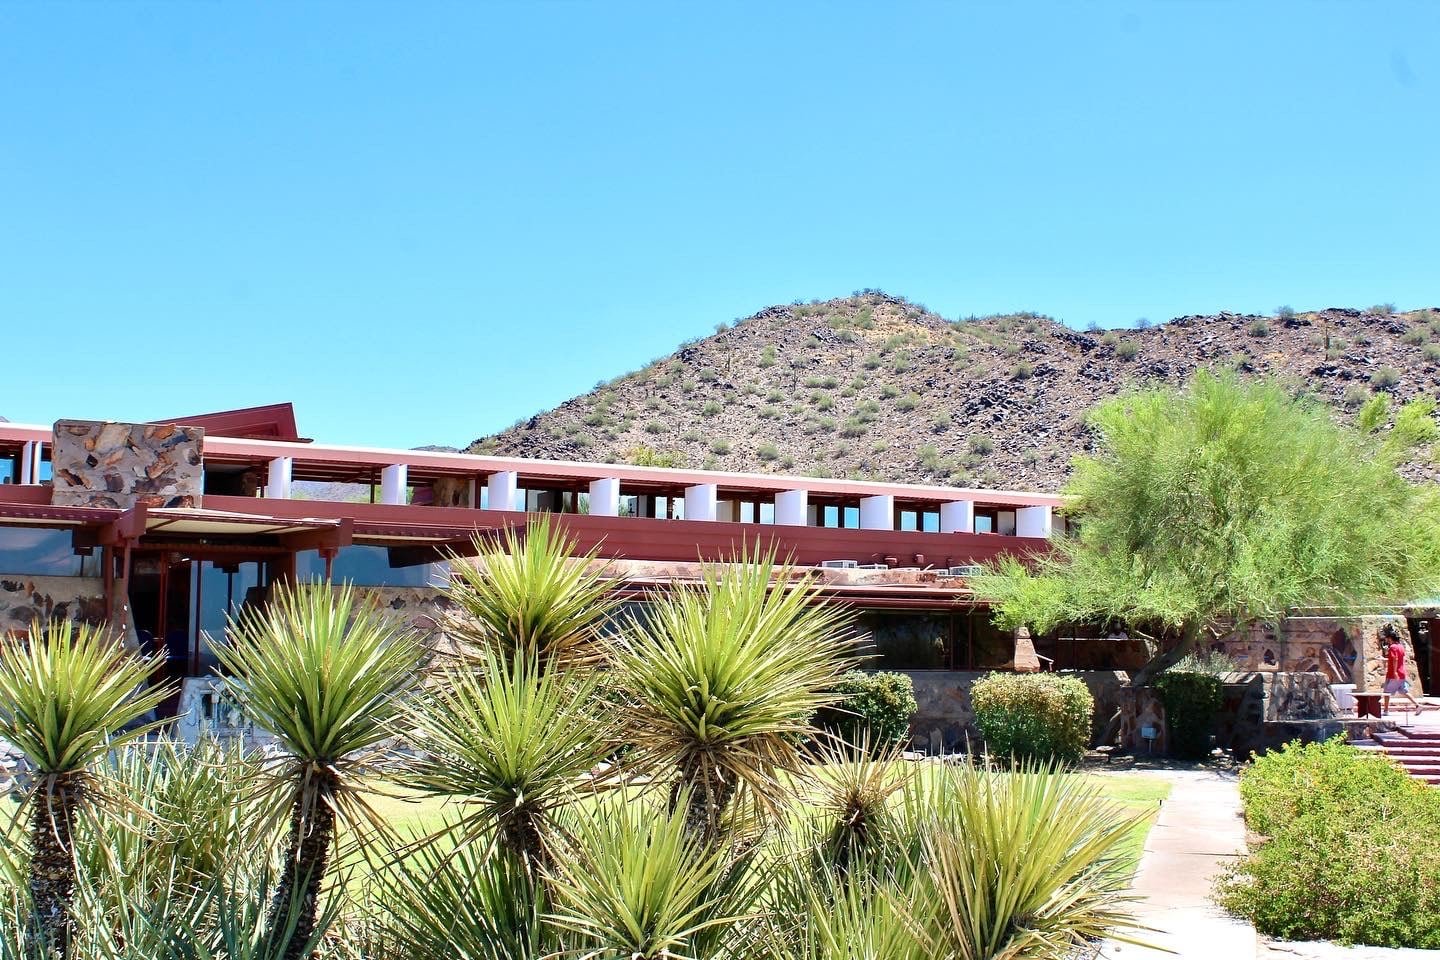 blog-camp-taliesin-west-student-gallery-pic04-andrew-pielage-photography.JPG